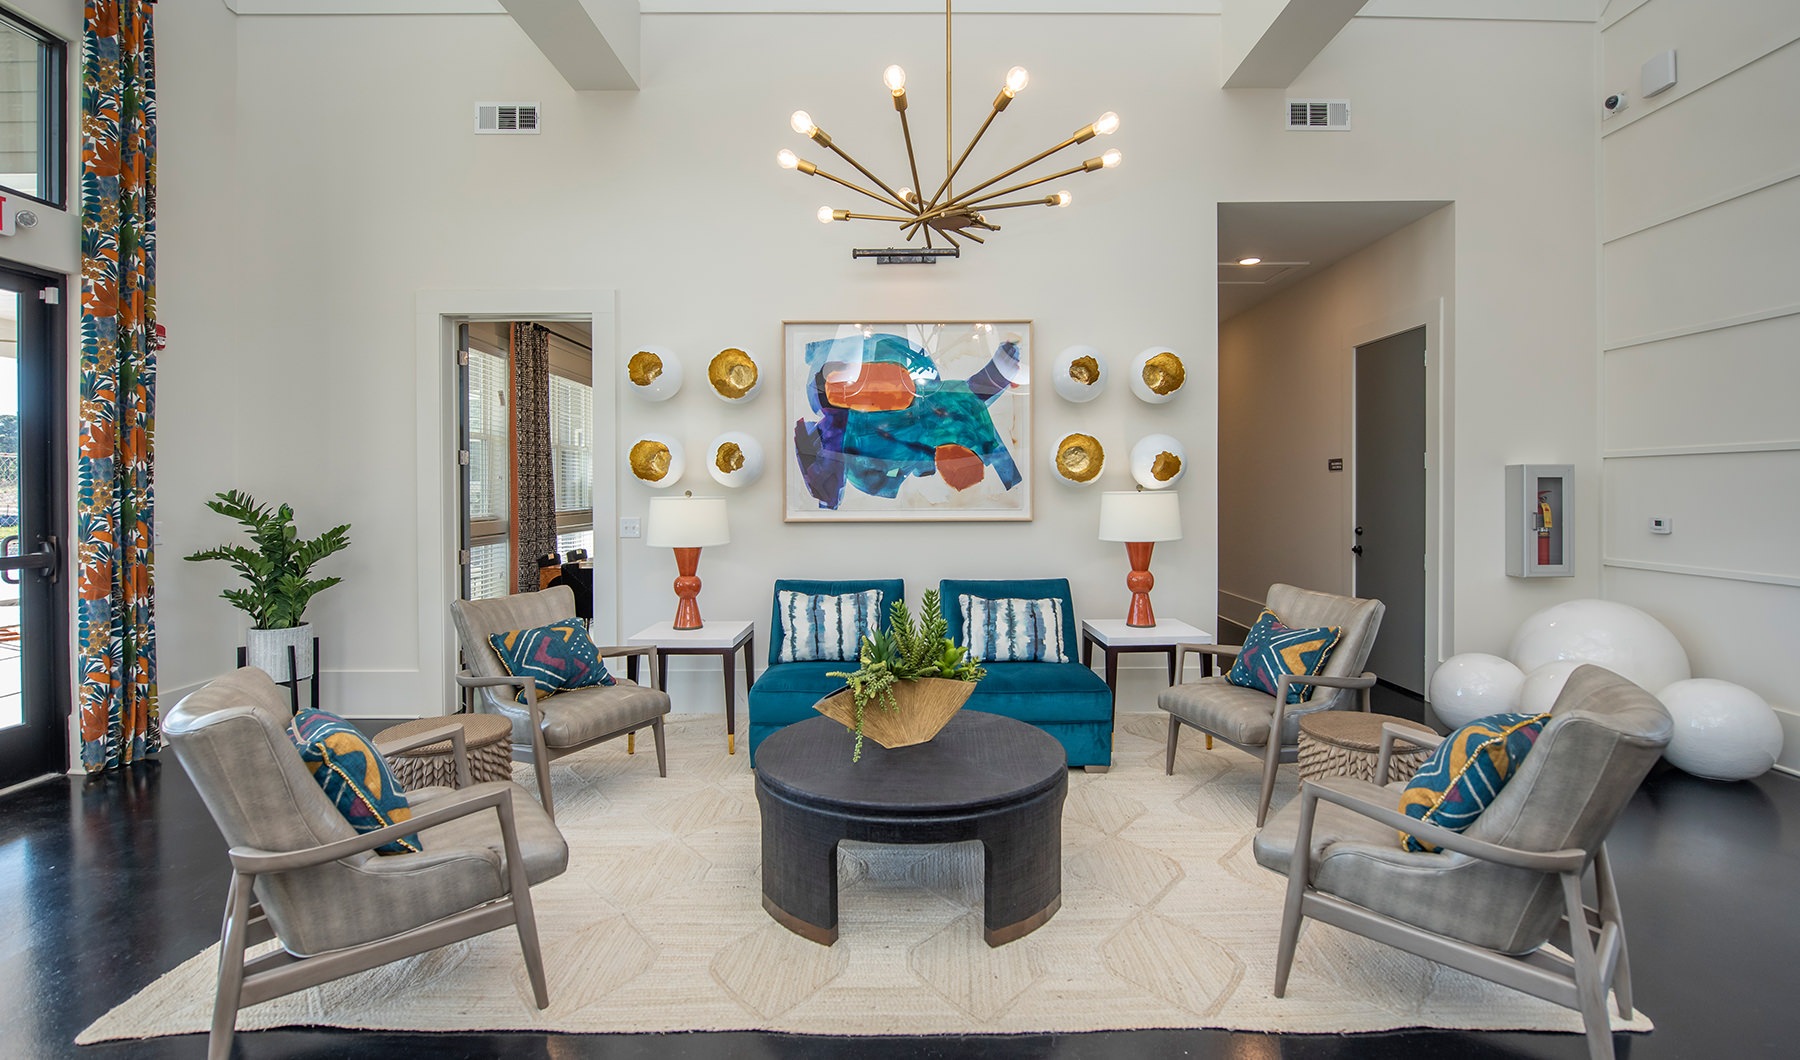 Vibrant common area with ample plush seating